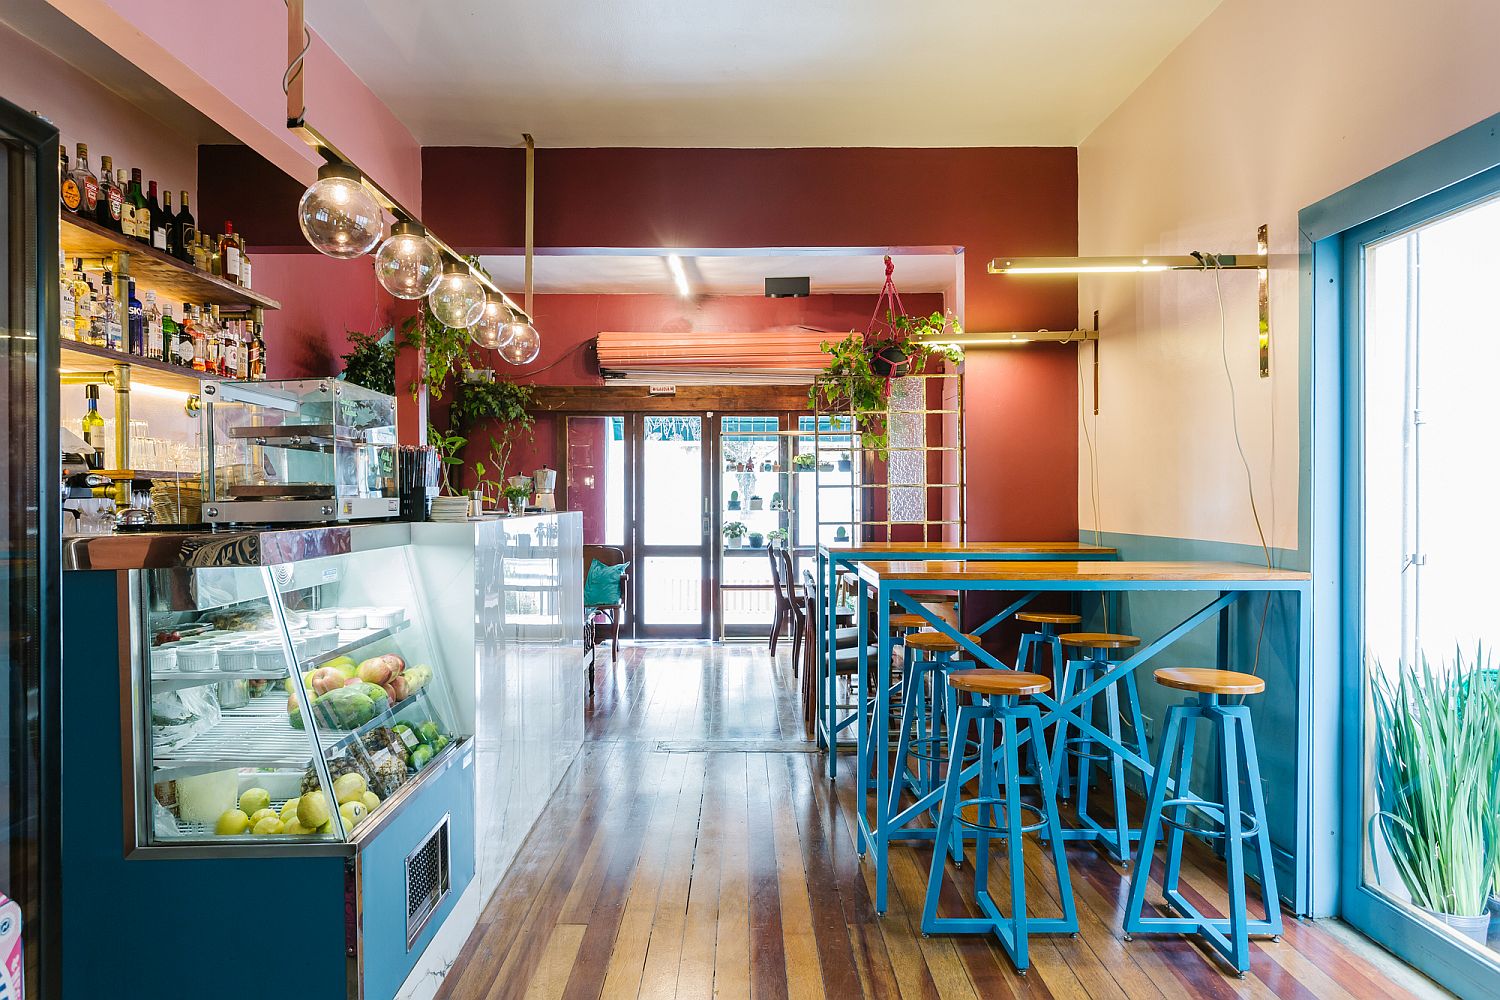 Lighting-and-bright-combination-of-colors-for-the-cafe